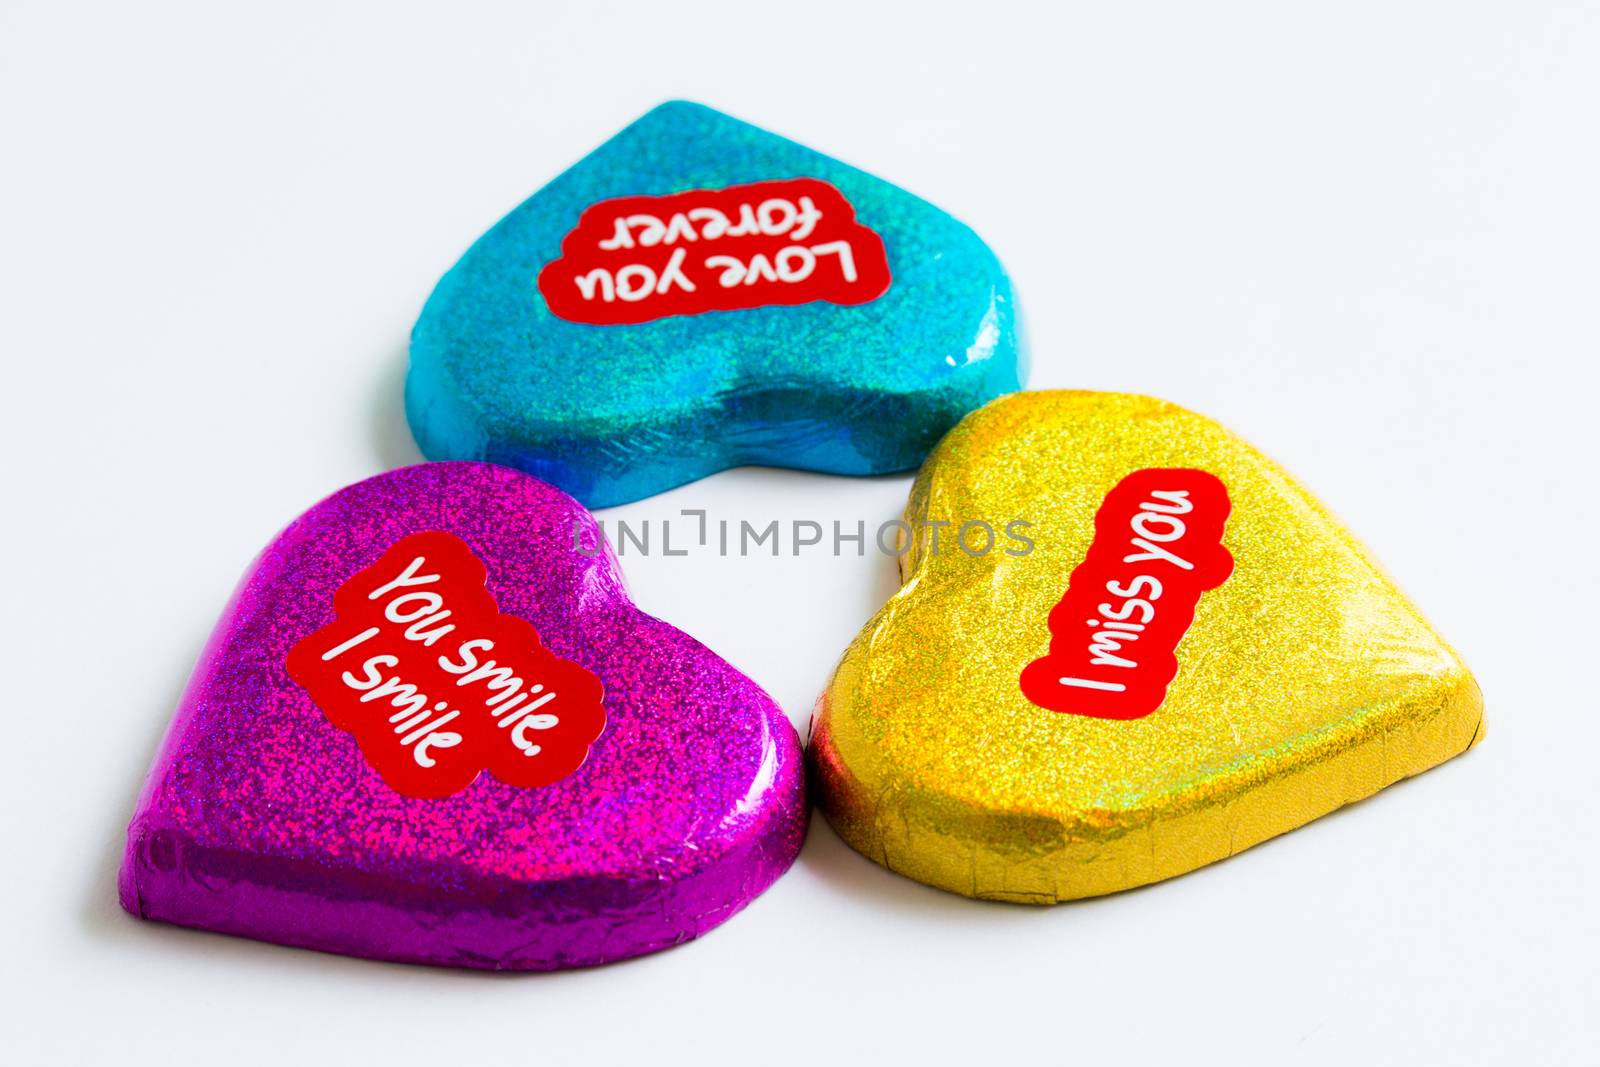 Chocolate wrapper  on Valentine's Day,colorful chocolate heart